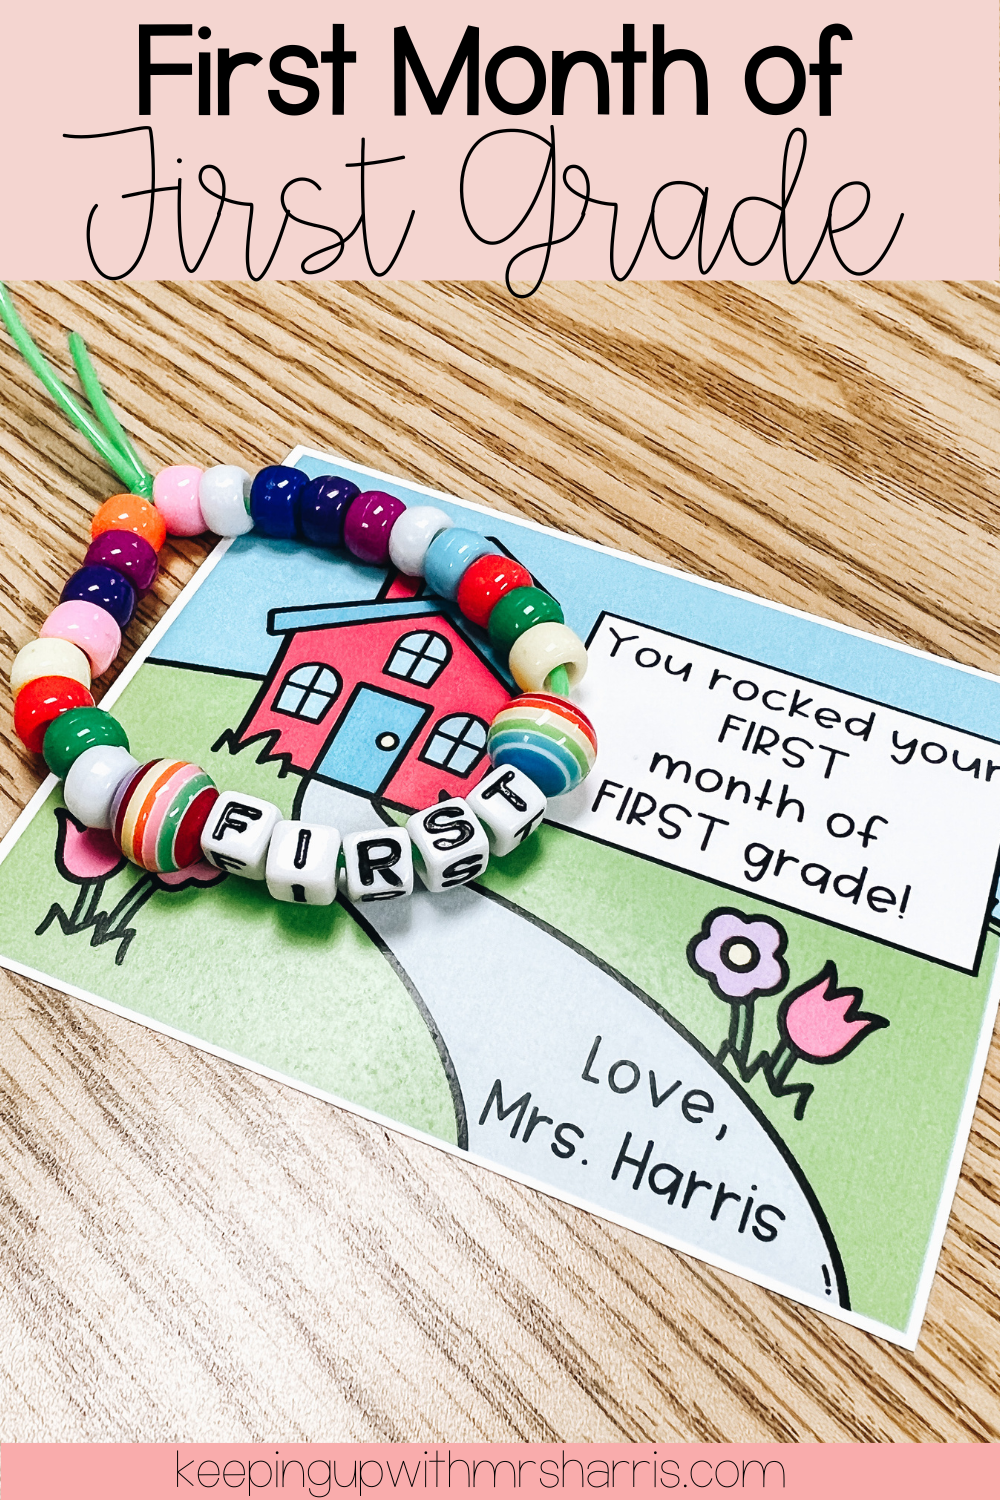 First month of first grade class celebration with bracelet making.